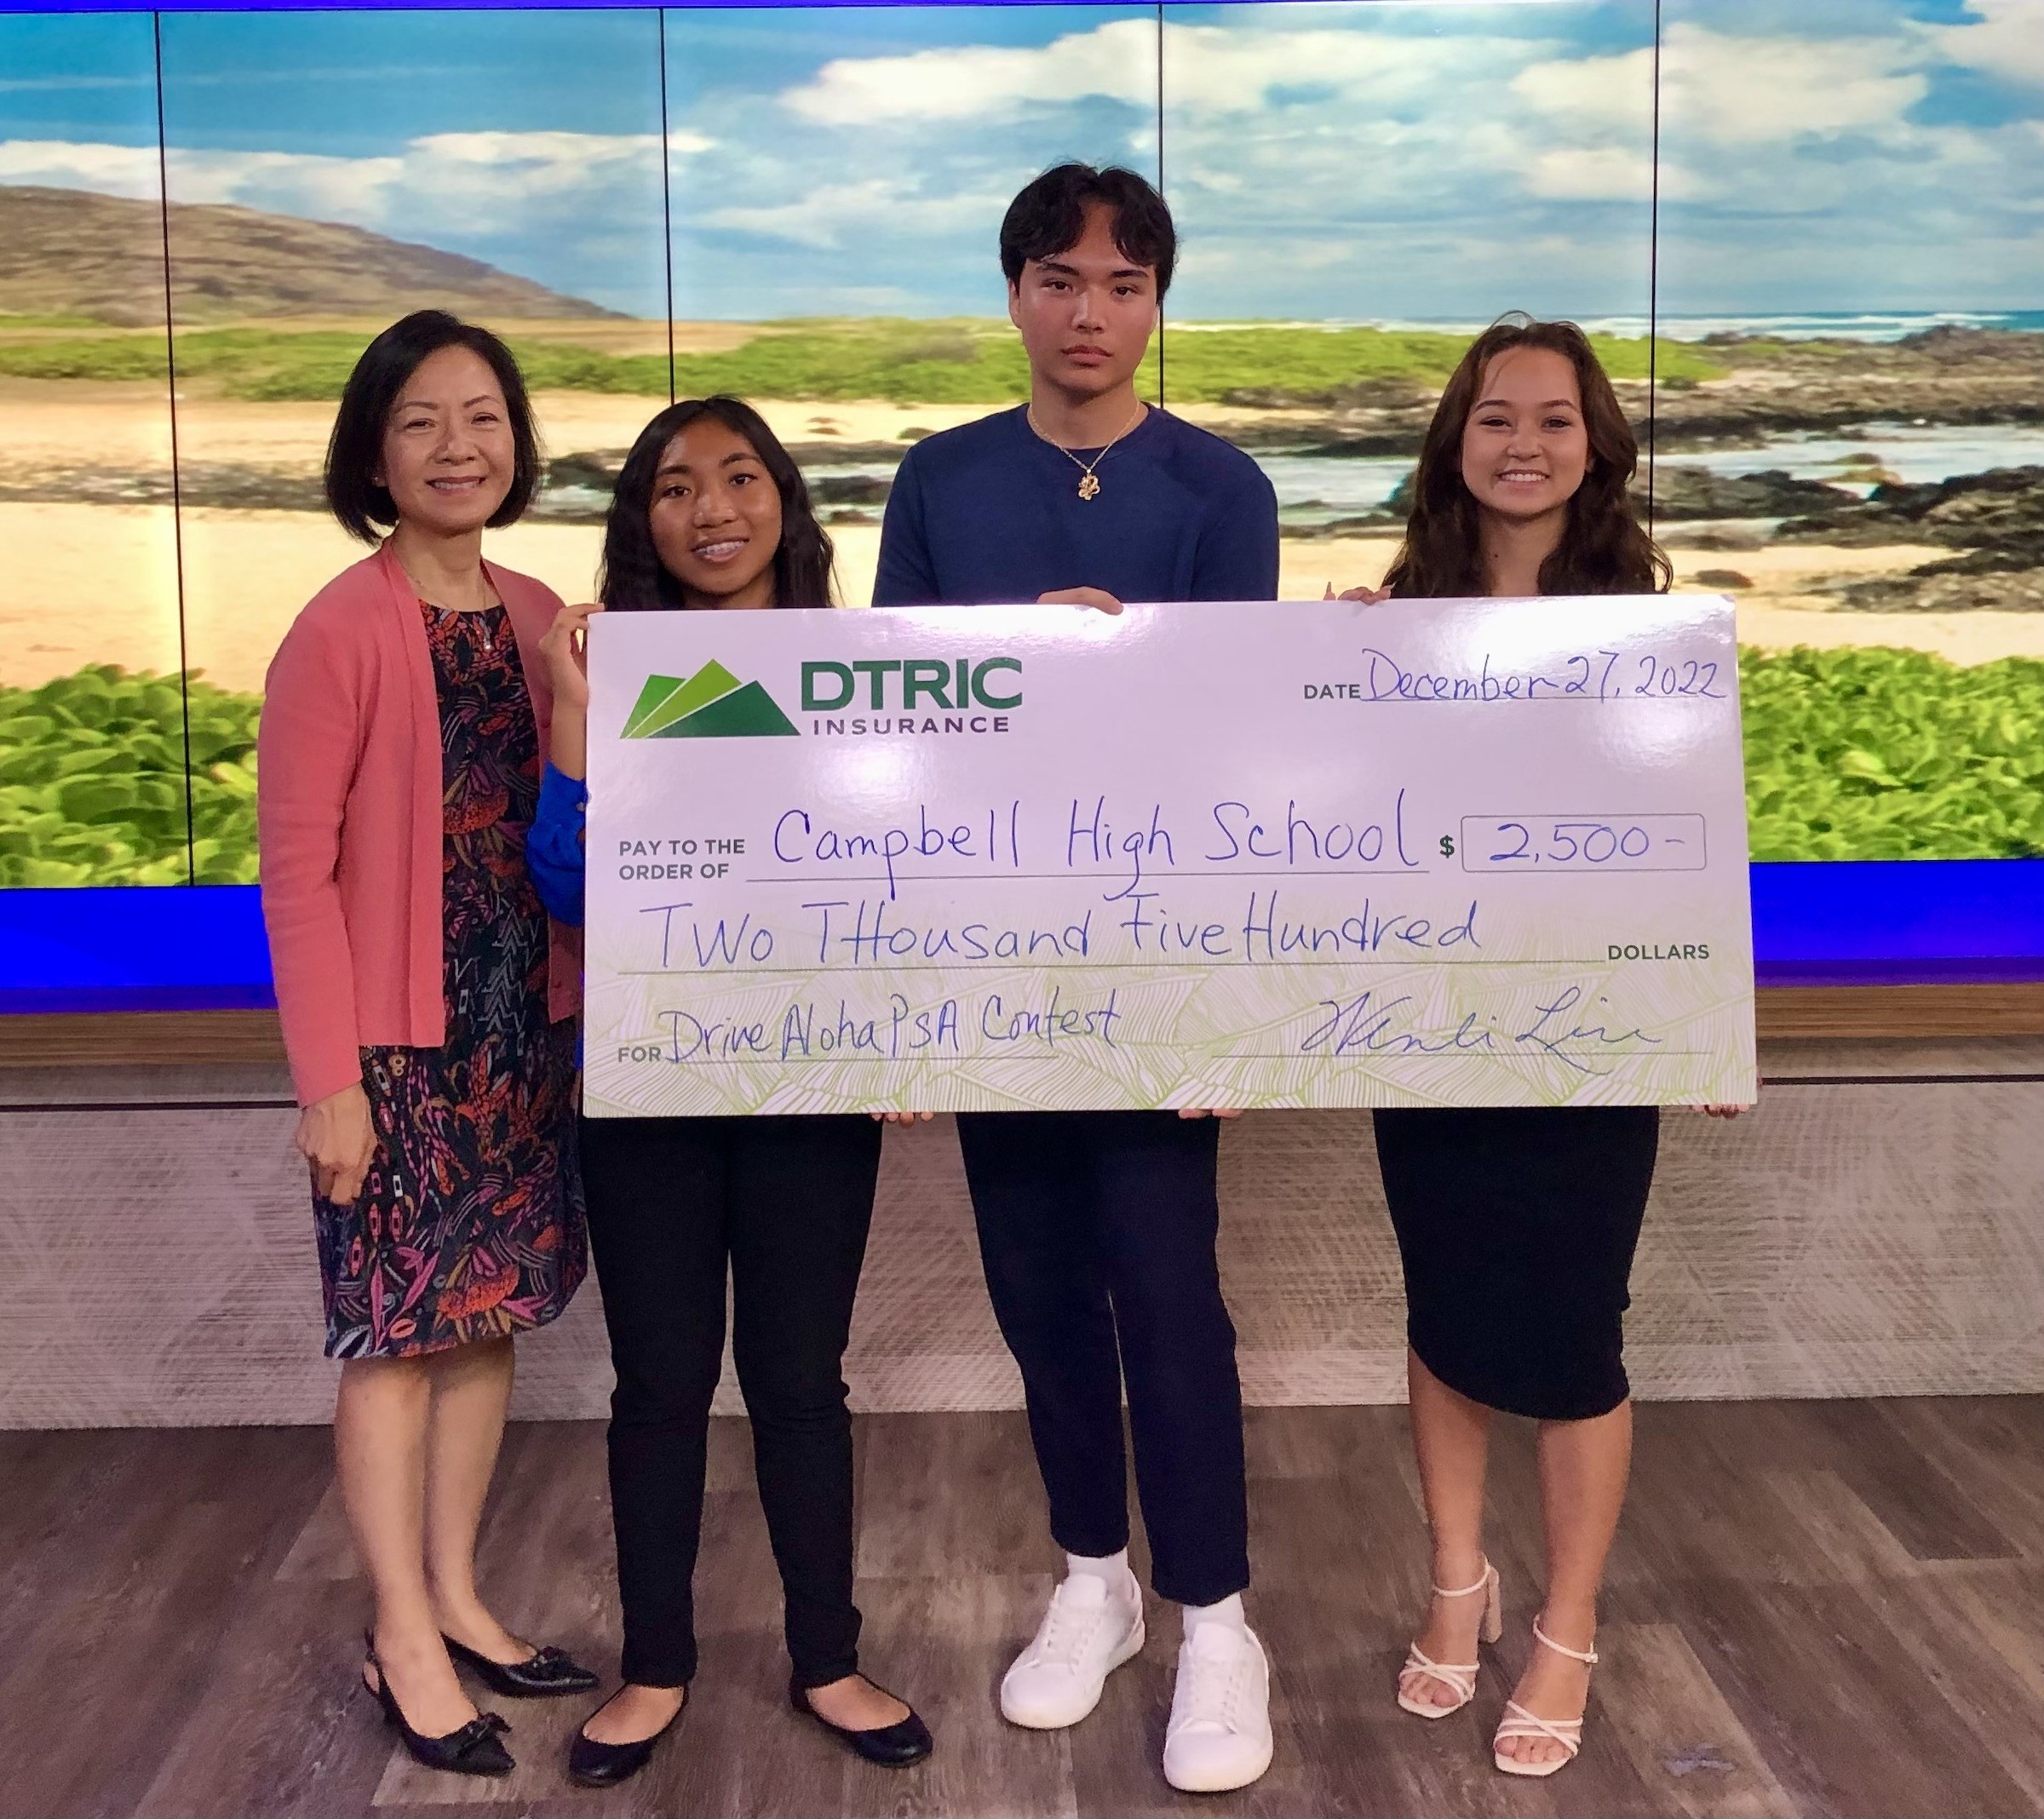 Campbell High School Named Winner Of Inaugural Drive Aloha PSA Contest Sponsored By DTRIC Insurance